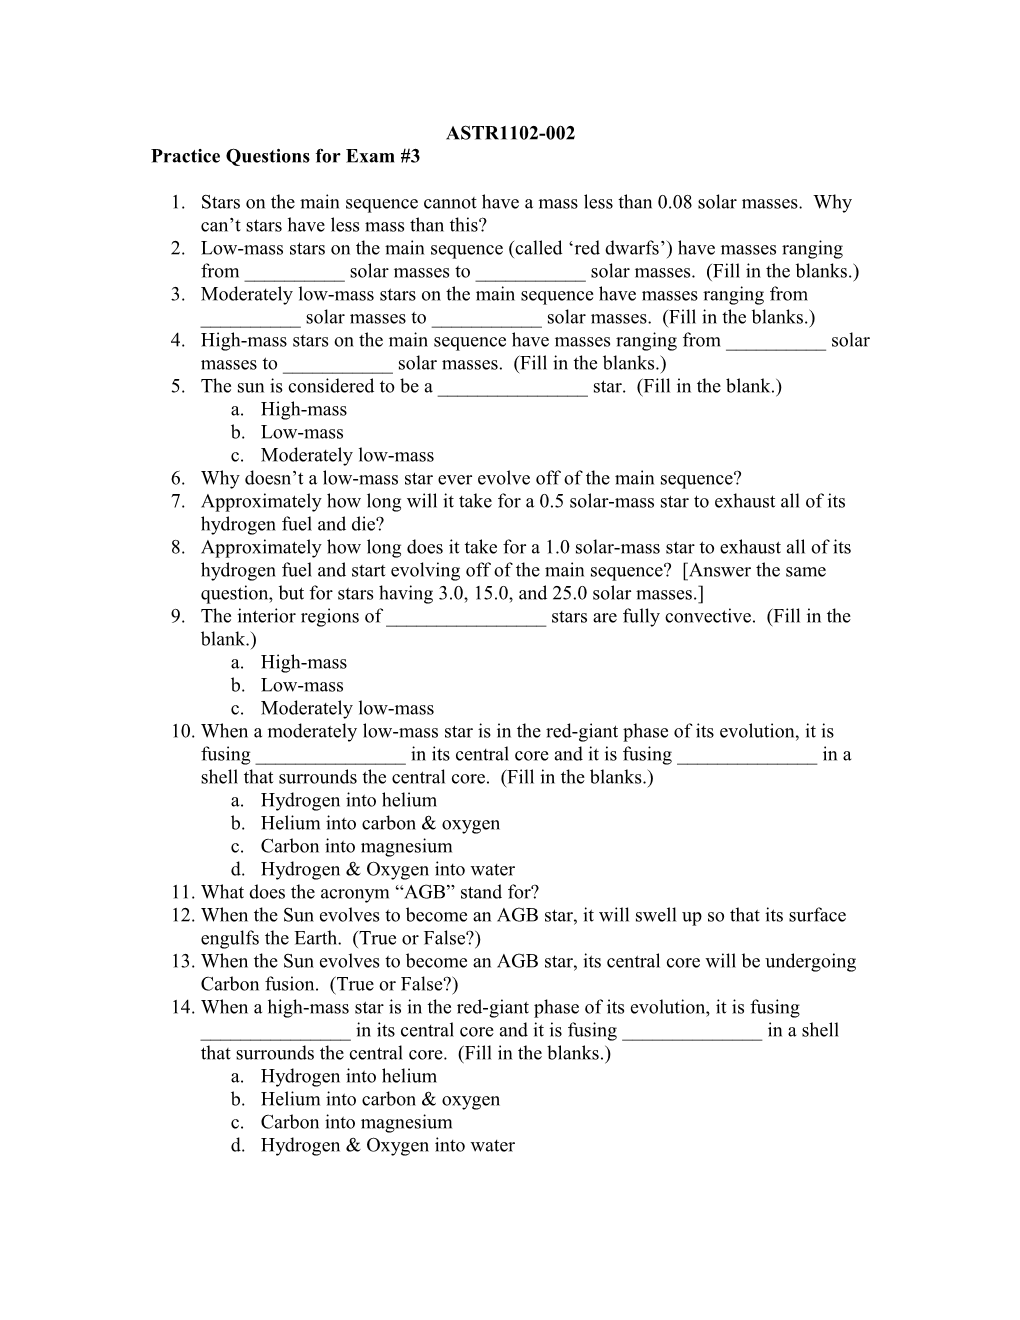 Practice Questions for Exam #3